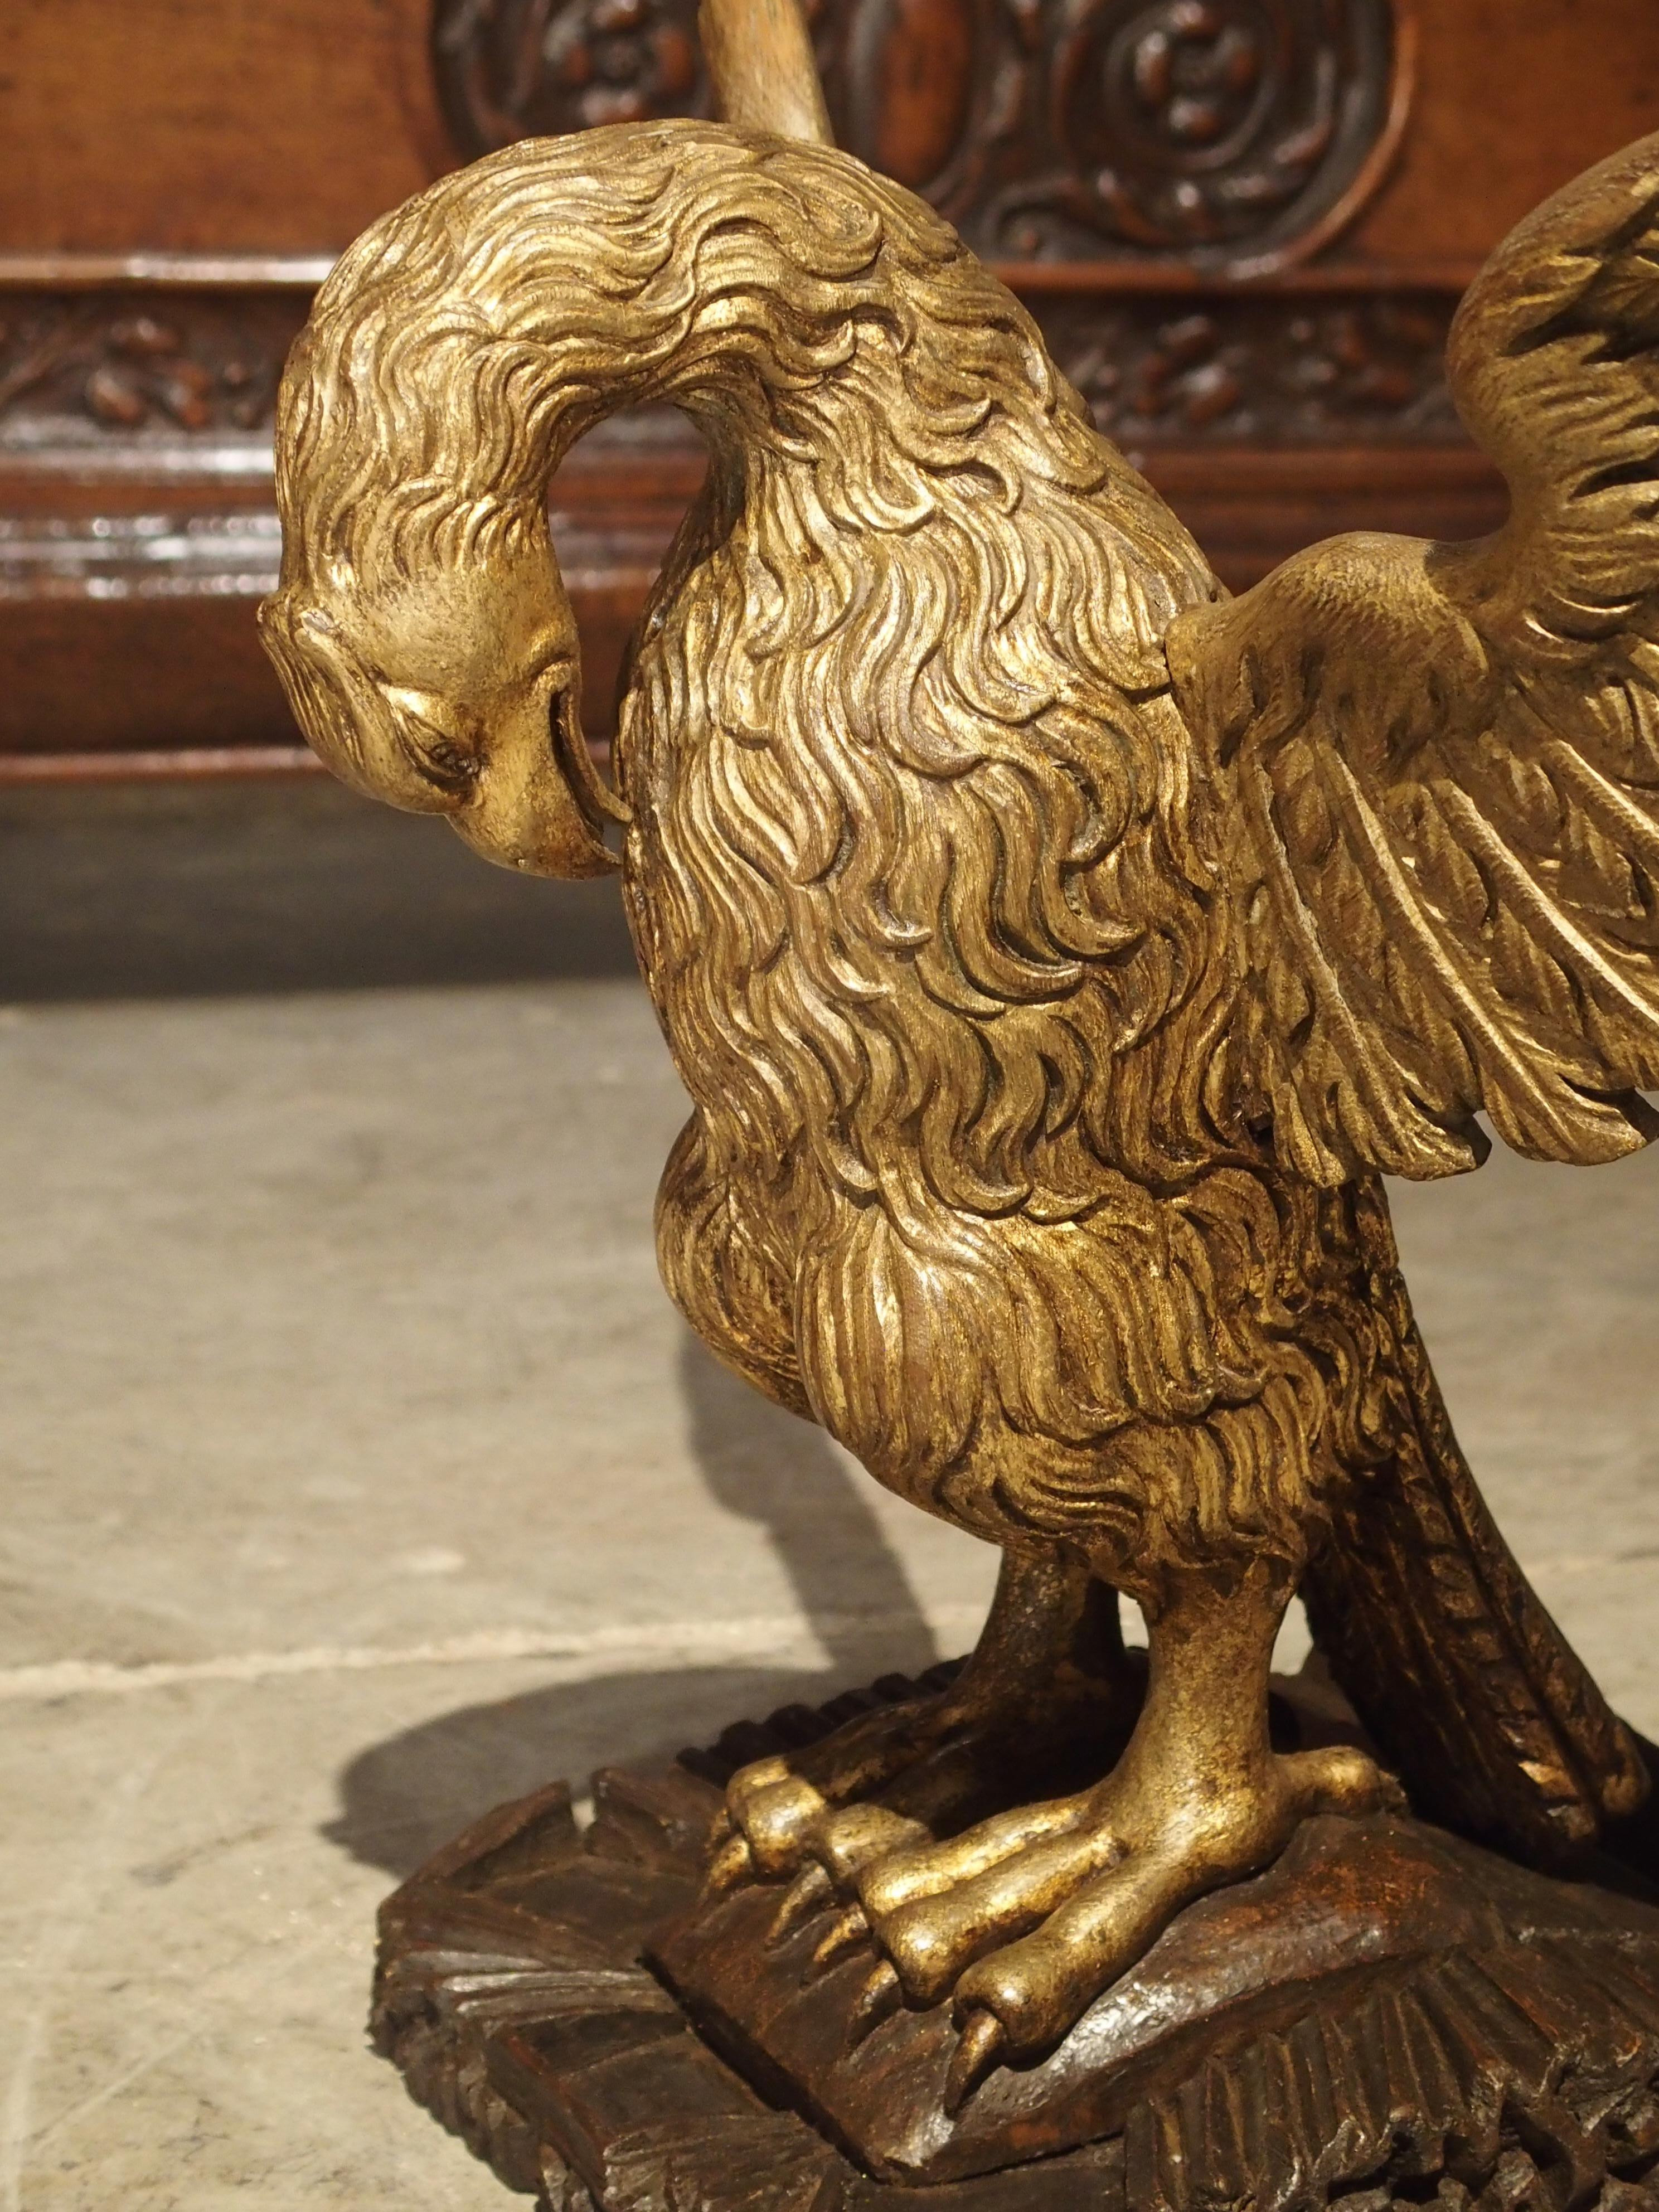 Beautifully and artistically shaped, this giltwood hand carved eagle on stand is from Europe. In ancient Rome, the Eagle came to symbolize power and strength. This eagle, with its outstretched wings is resting upon a carved wooden base. His position